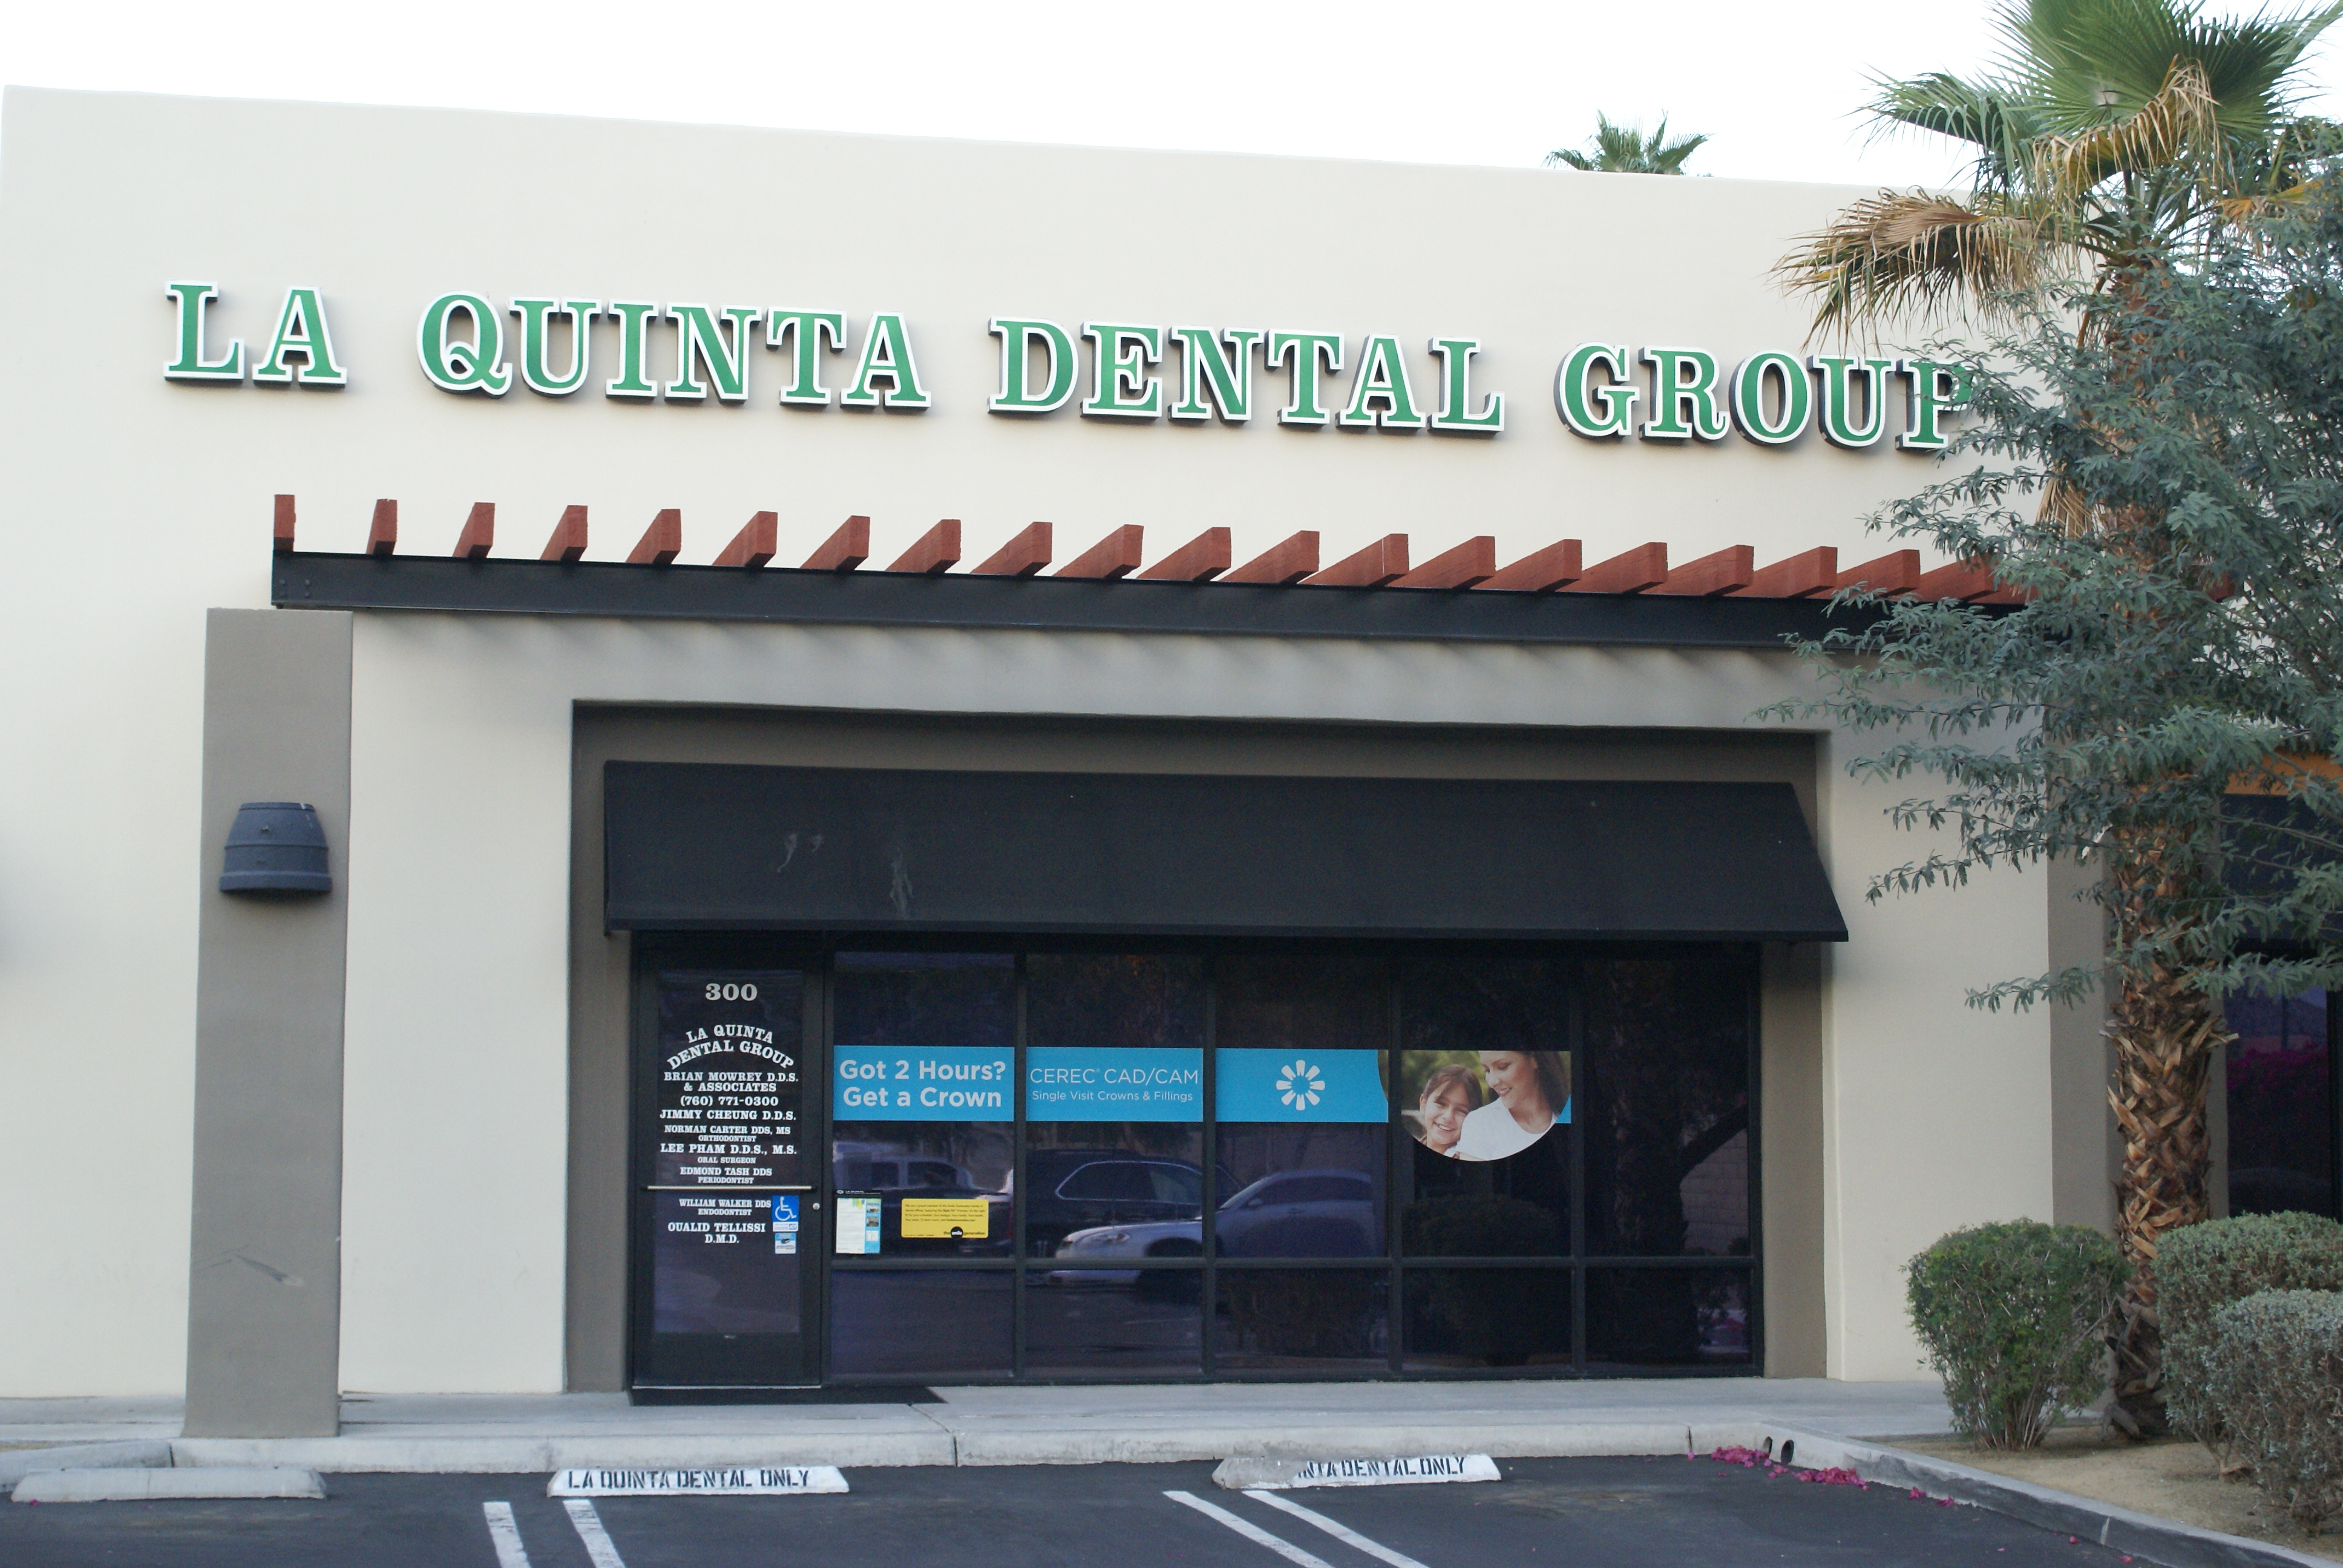 Looking for a family dentist in La Quinta, CA? You have come to the right spot! La Quinta Dental Group and Orthodontics La Quinta (760)771-0300